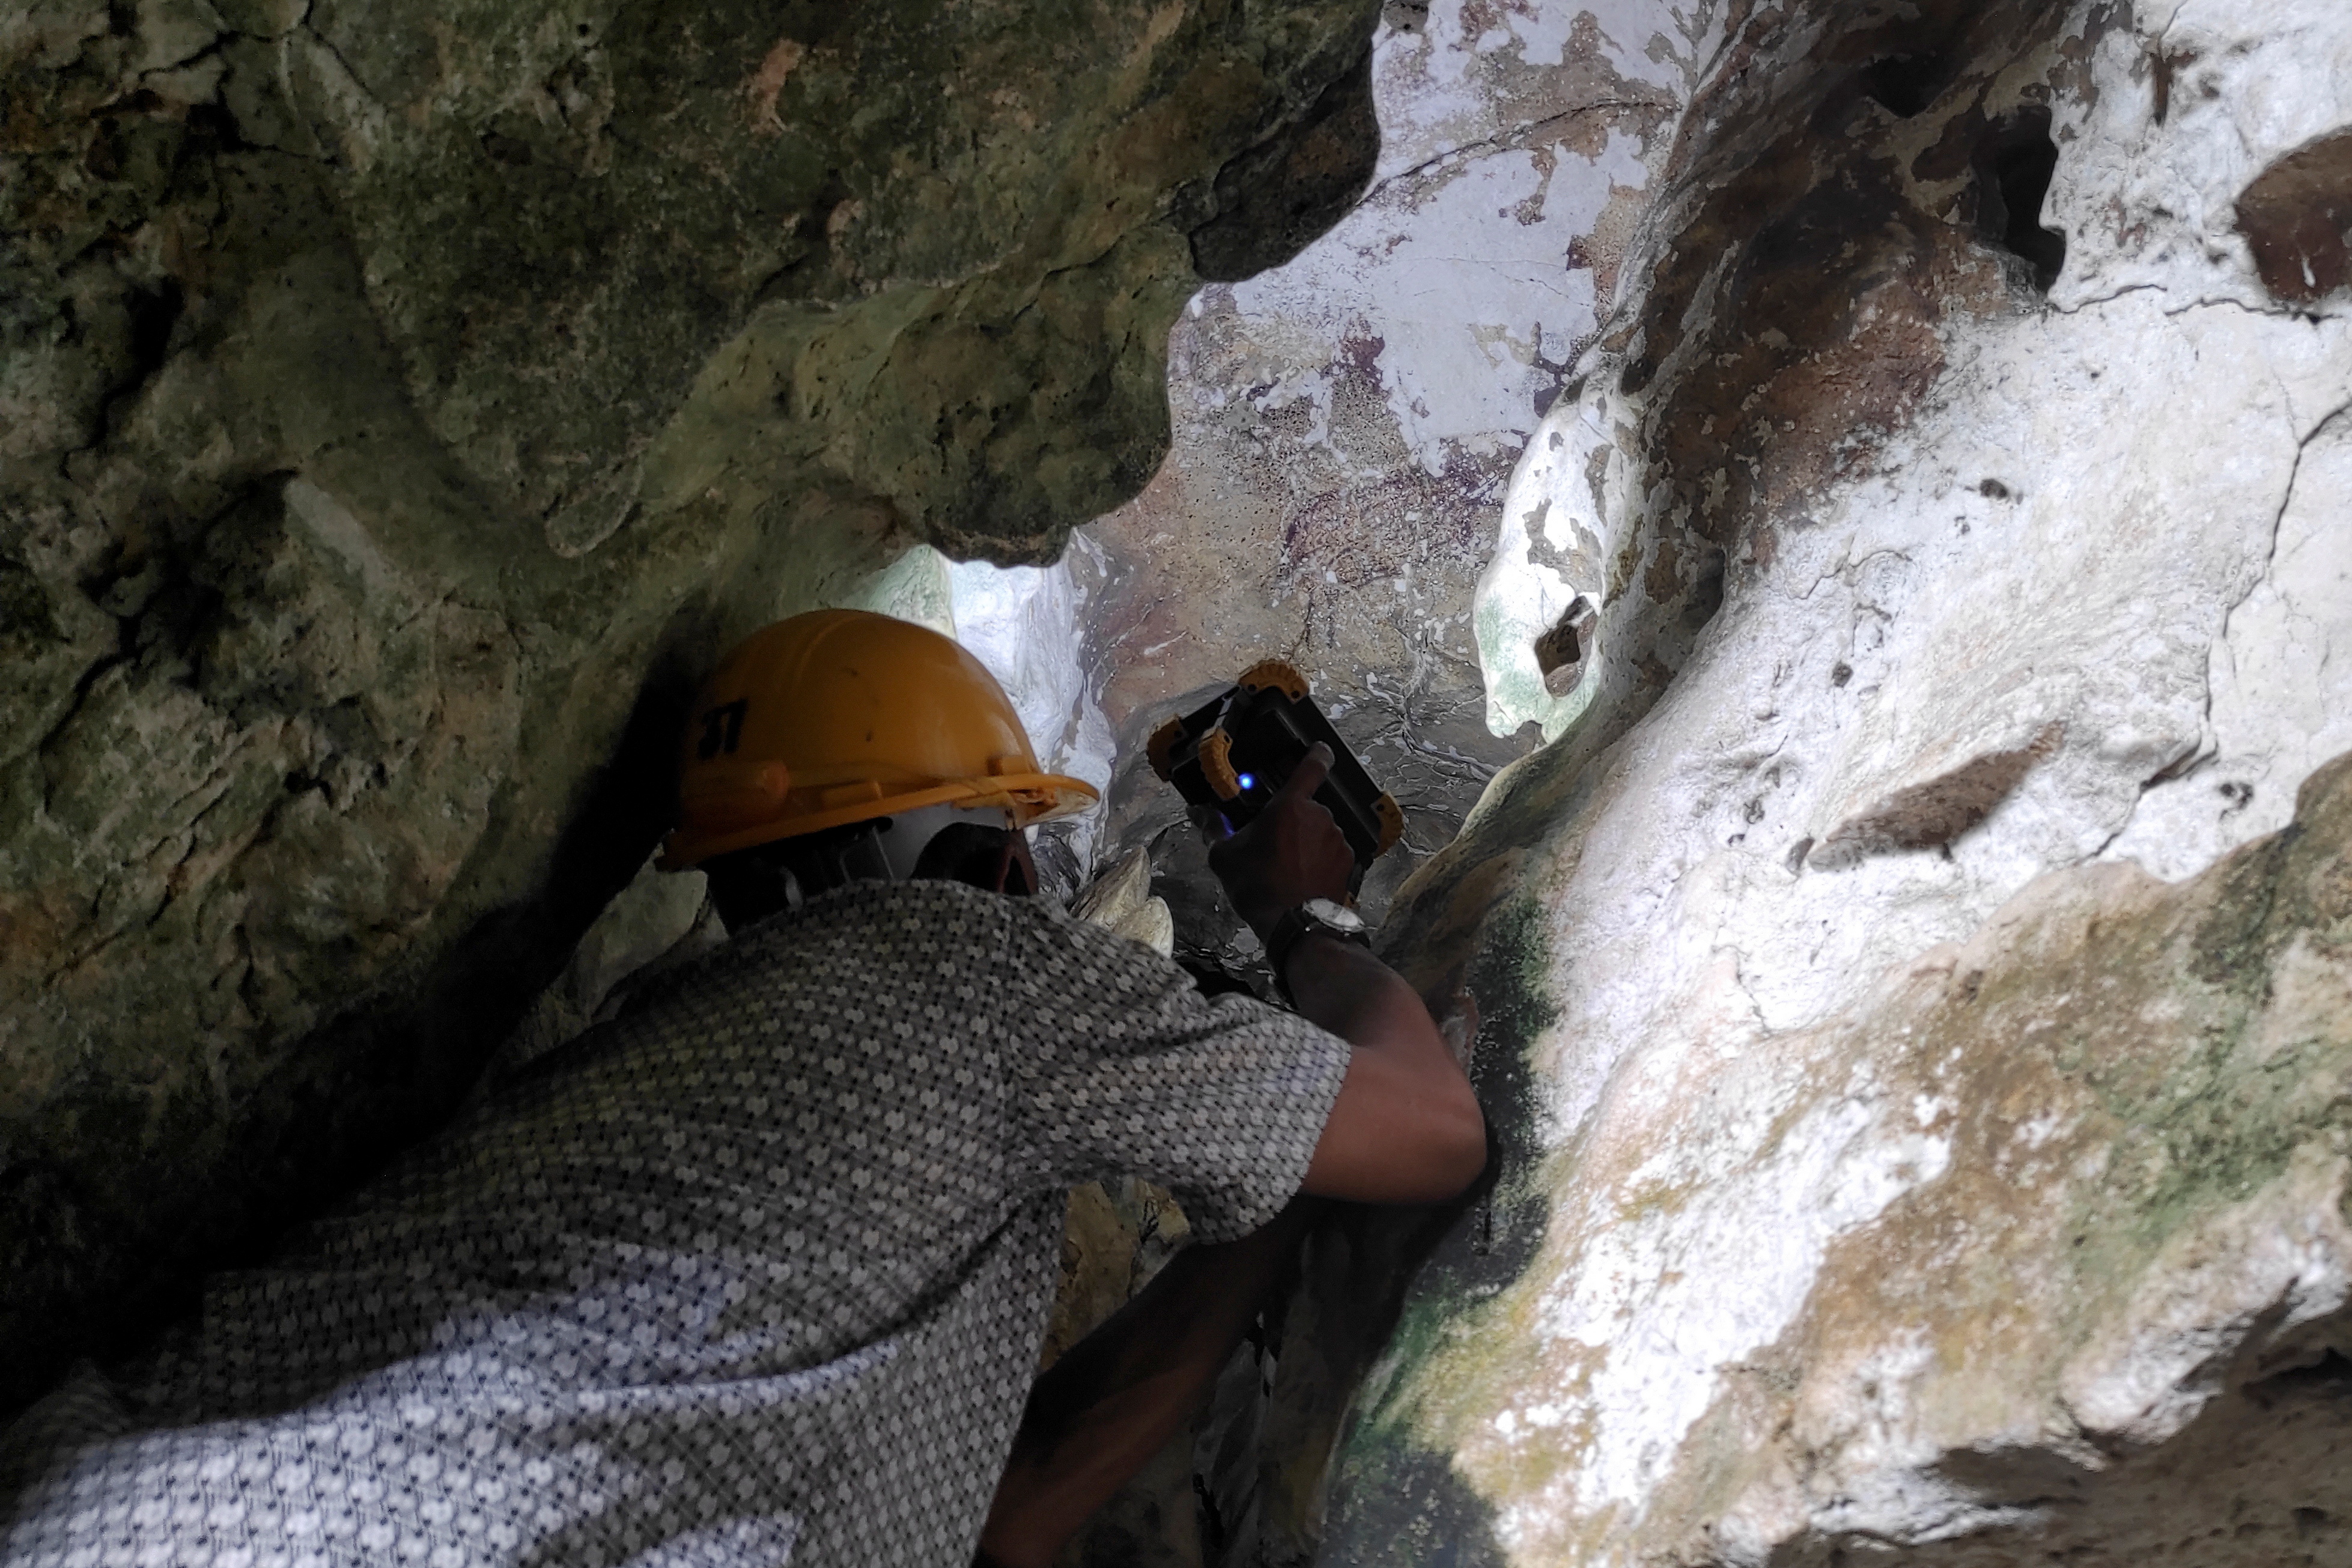 Archeologists inspect world's oldest limestone cave painting decaying due to climate change, in Maros regency